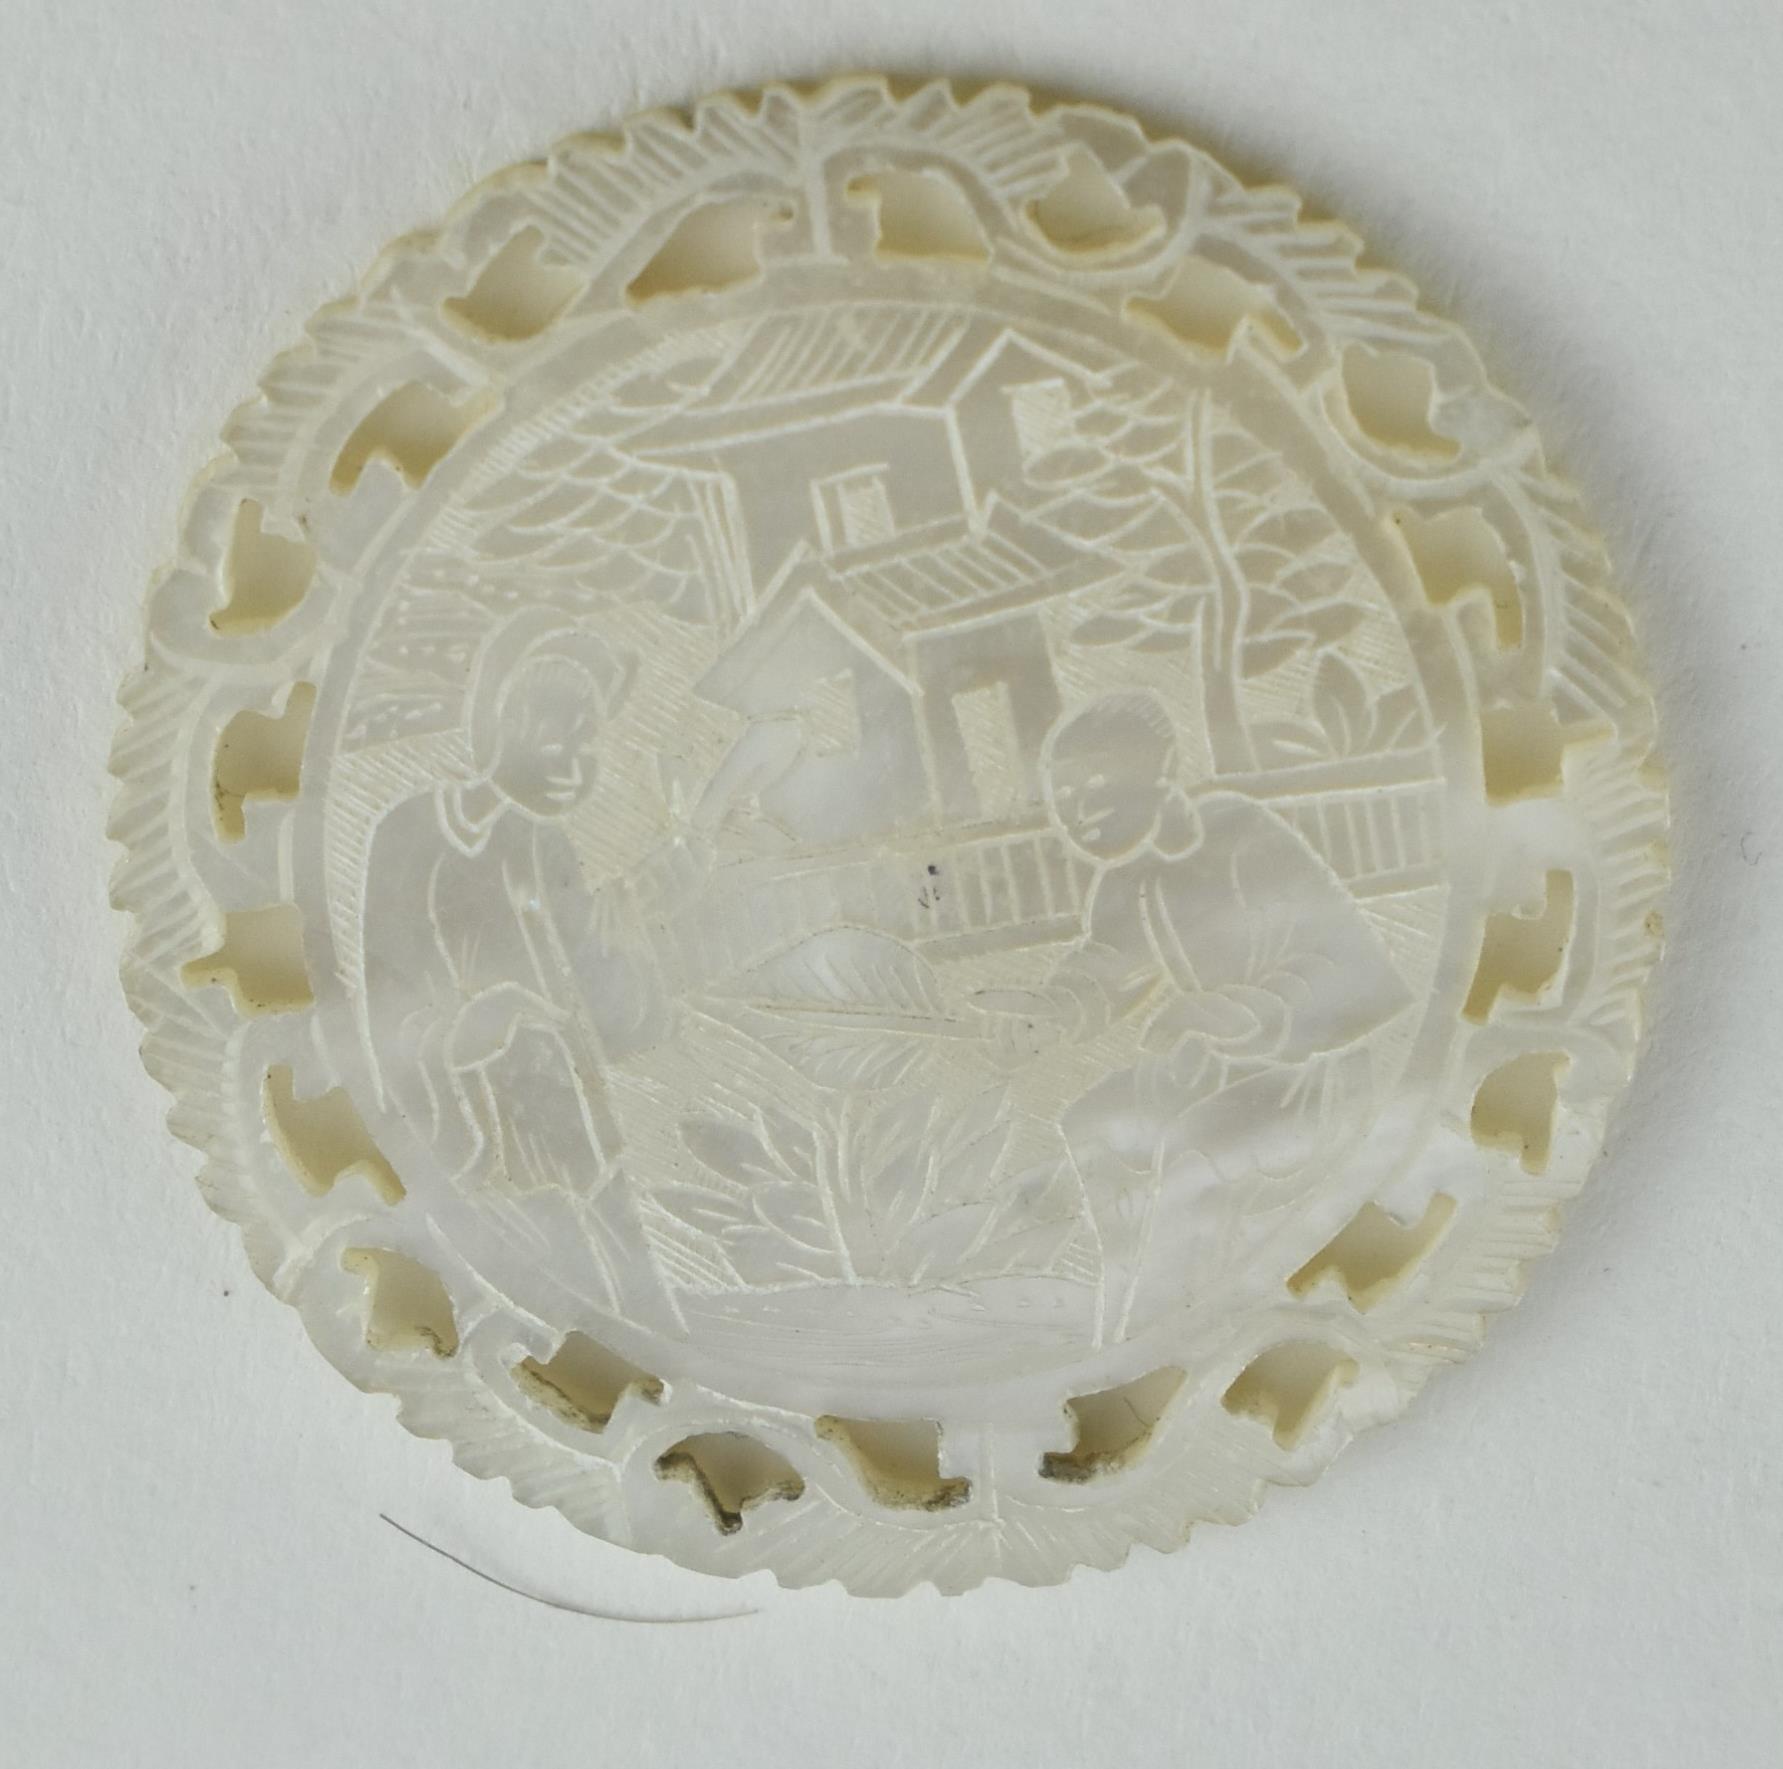 QING DYNASTY MOTHER OF PEARL GAMING TOKENS 清十三行贝母筹码 - Image 3 of 11